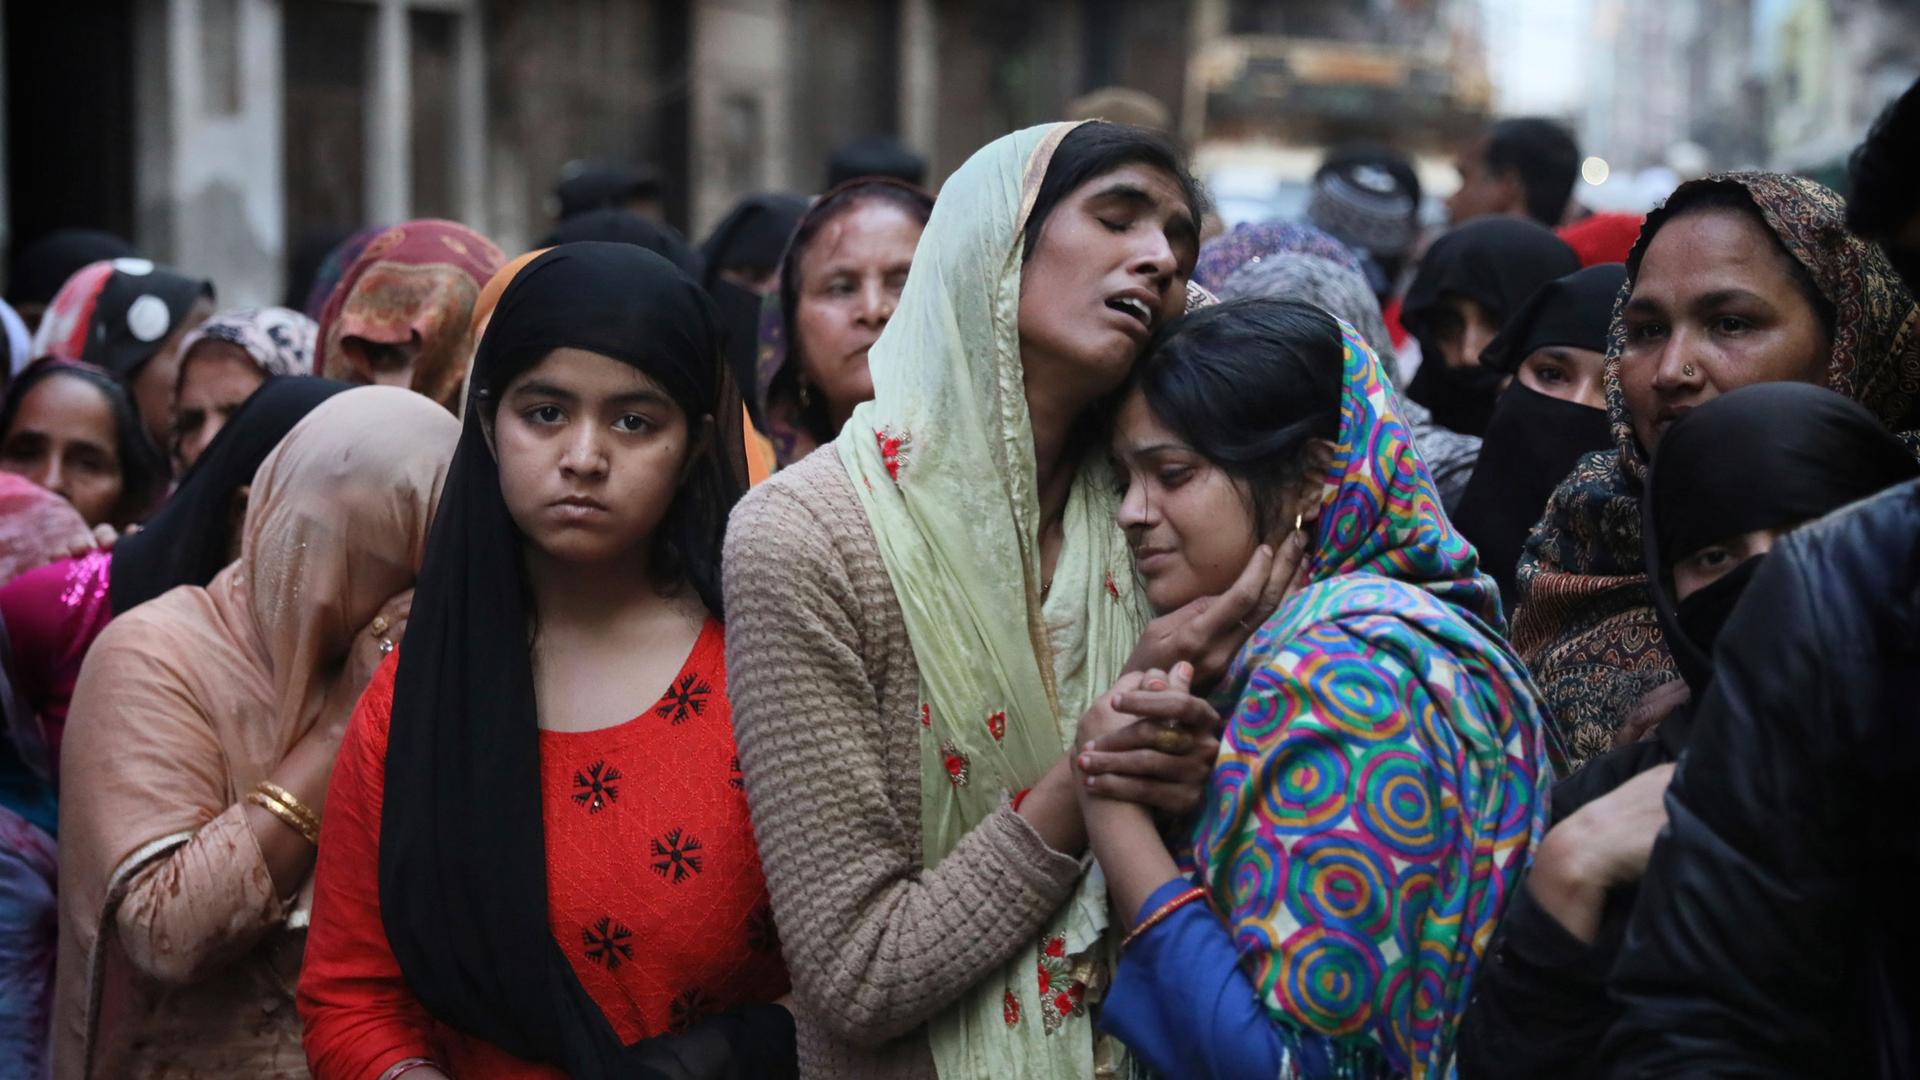 Relatives and neighbors wail near the body of Mohammad Mudasir, 31, who was killed in communal violence in New Delhi, India, Thursday, Feb. 27, 2020. 